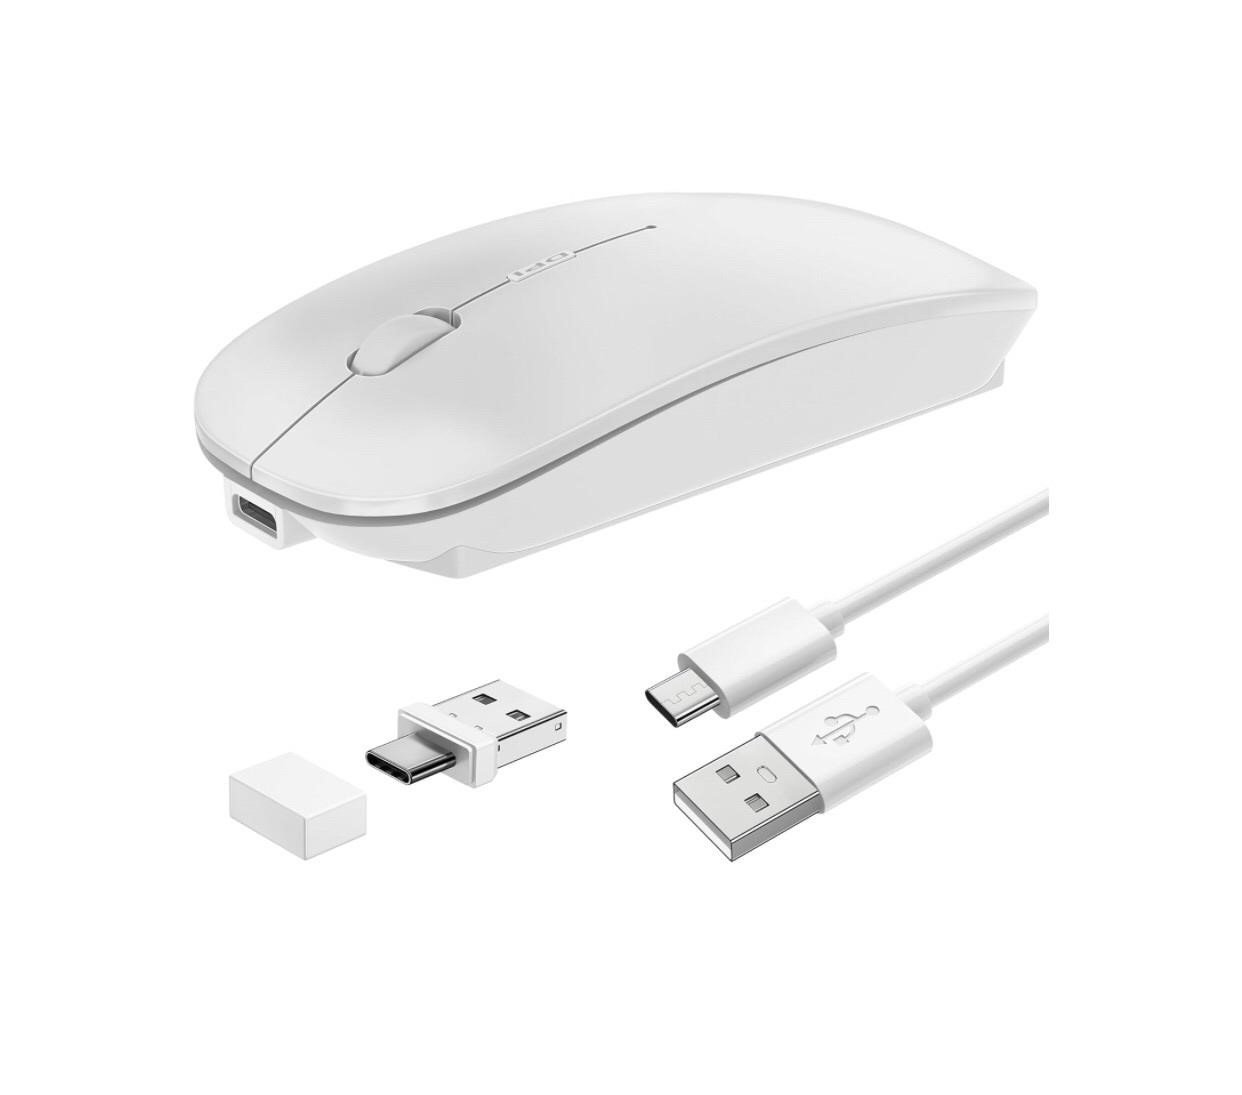 Tsmine Blutooth Wireless Mouse, White